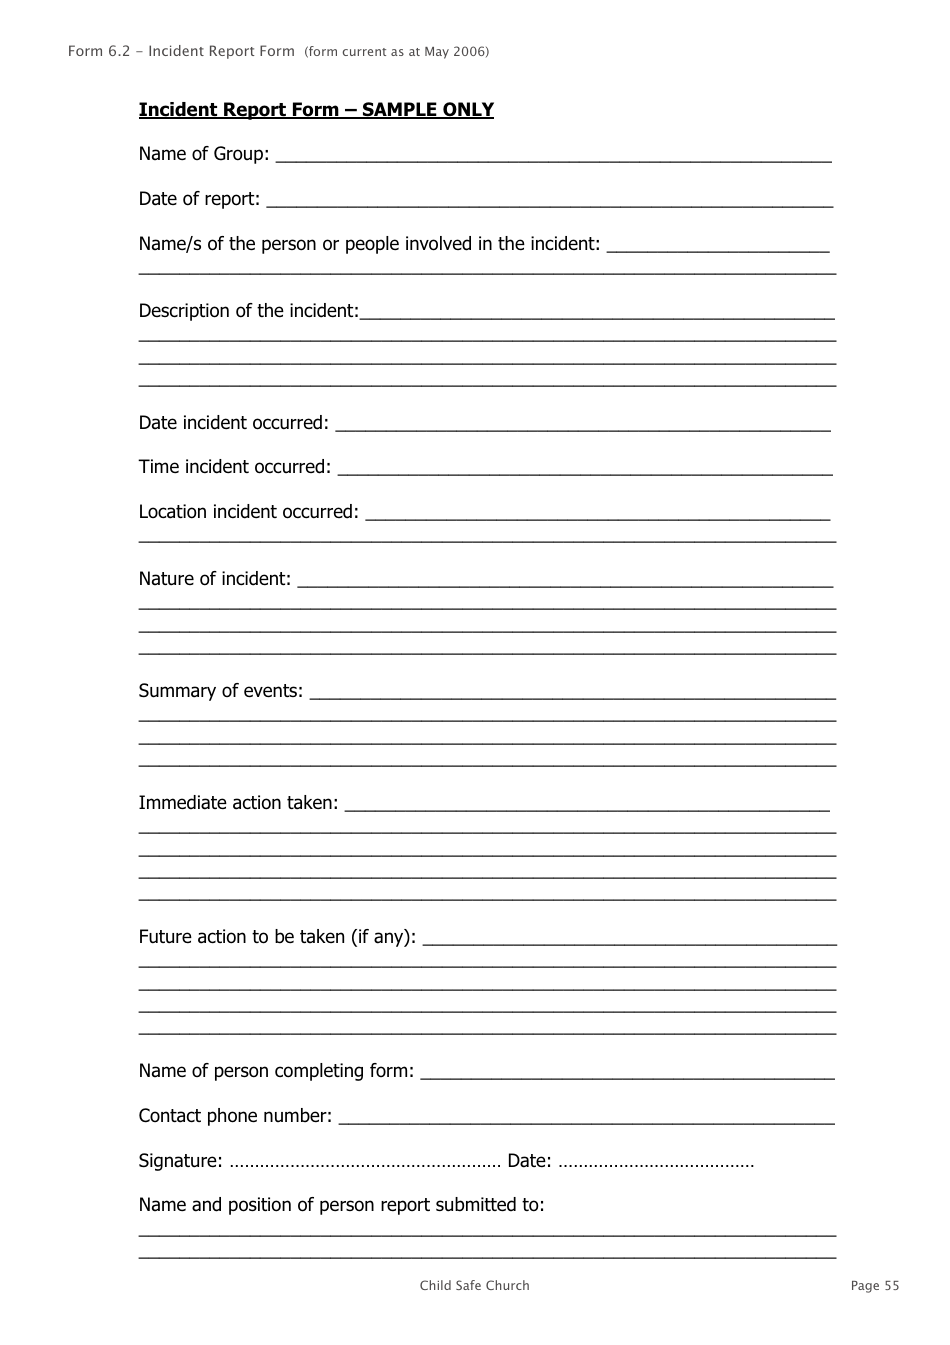 Church Incident Report Form - Sample Only, Page 1